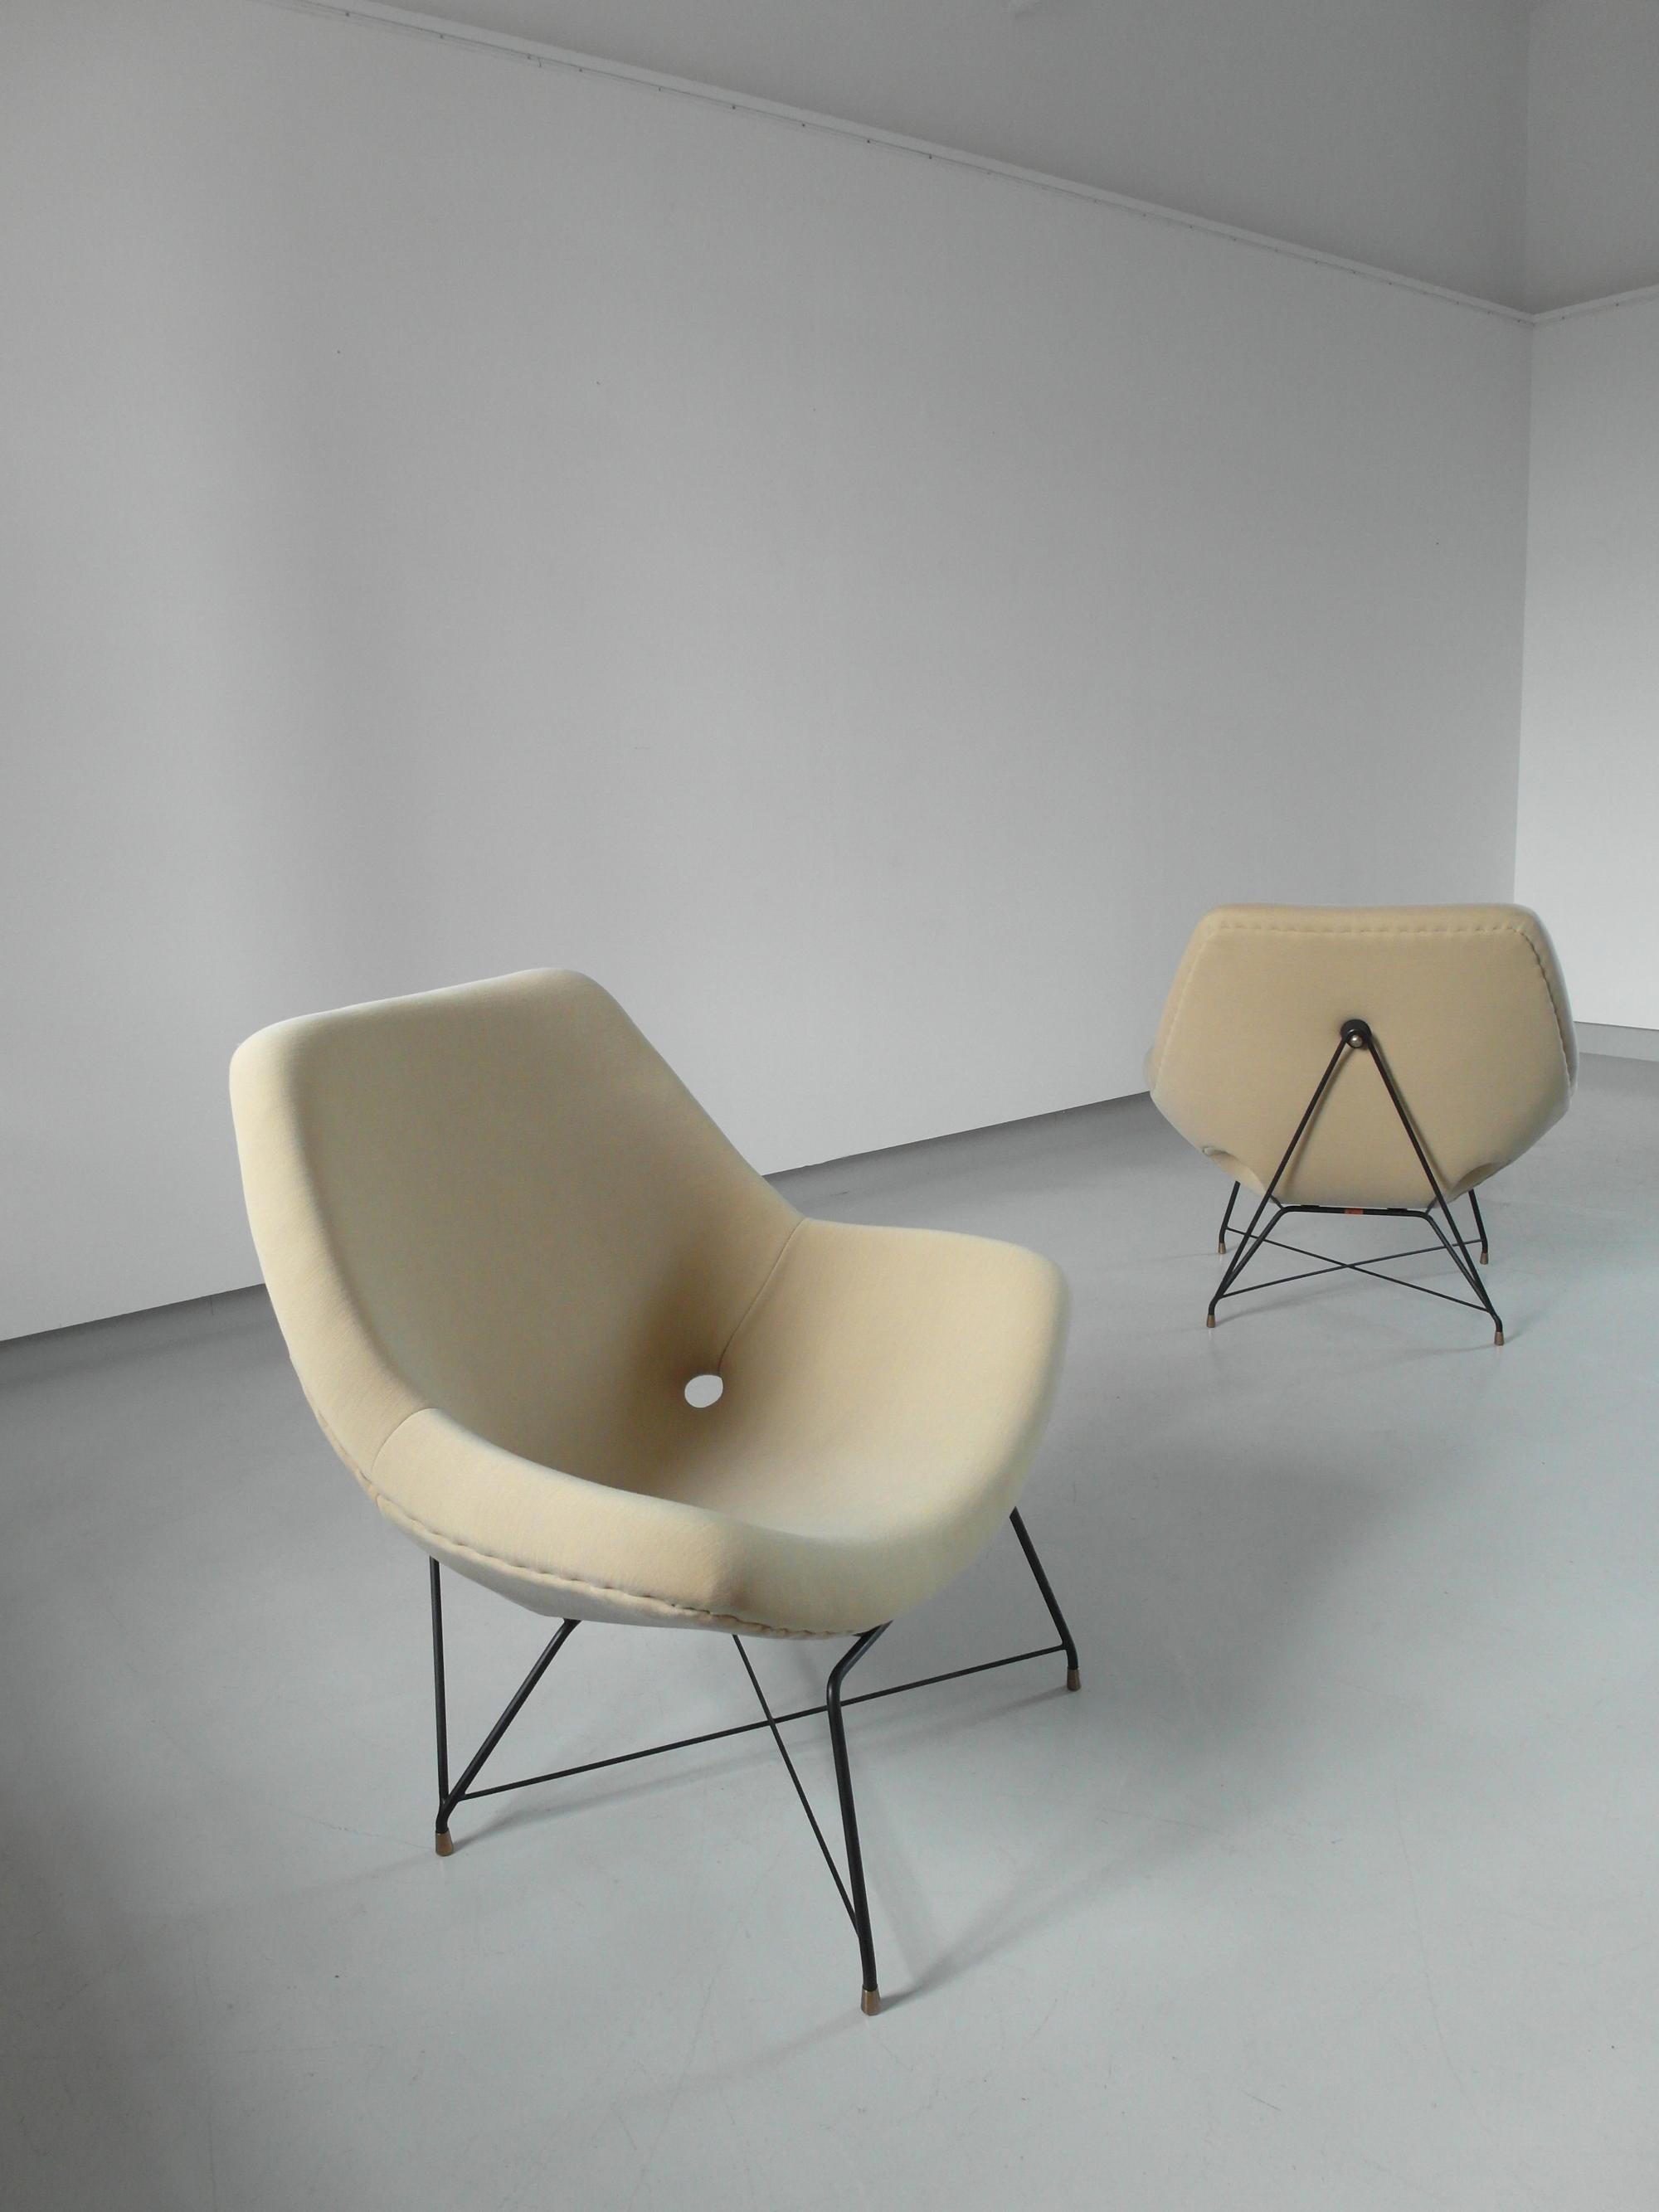 Sculptural Pair of Lounge Chairs by Augusto Bozzi for Saporiti, Italy, 1954 For Sale 13